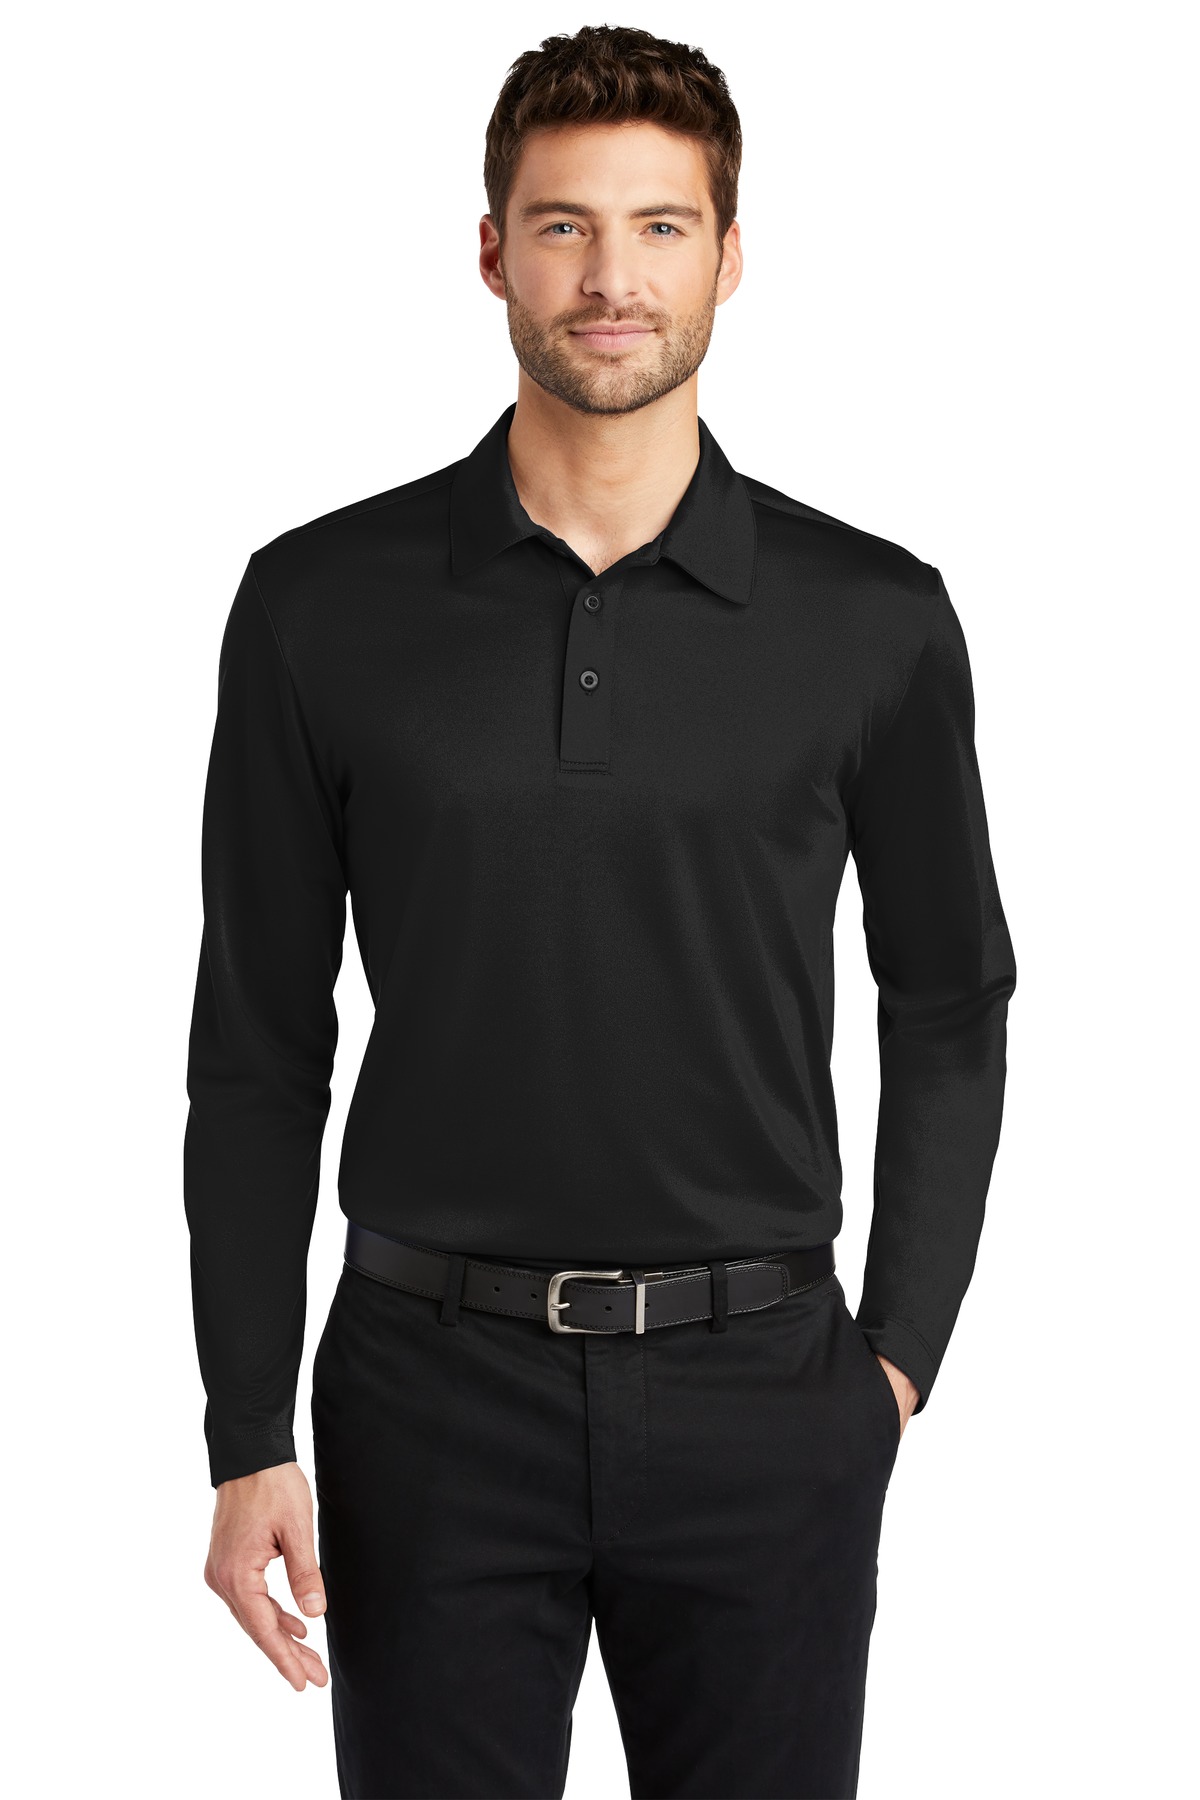 Port Authority Silk Touch Performance Long Sleeve Polo. K540LS